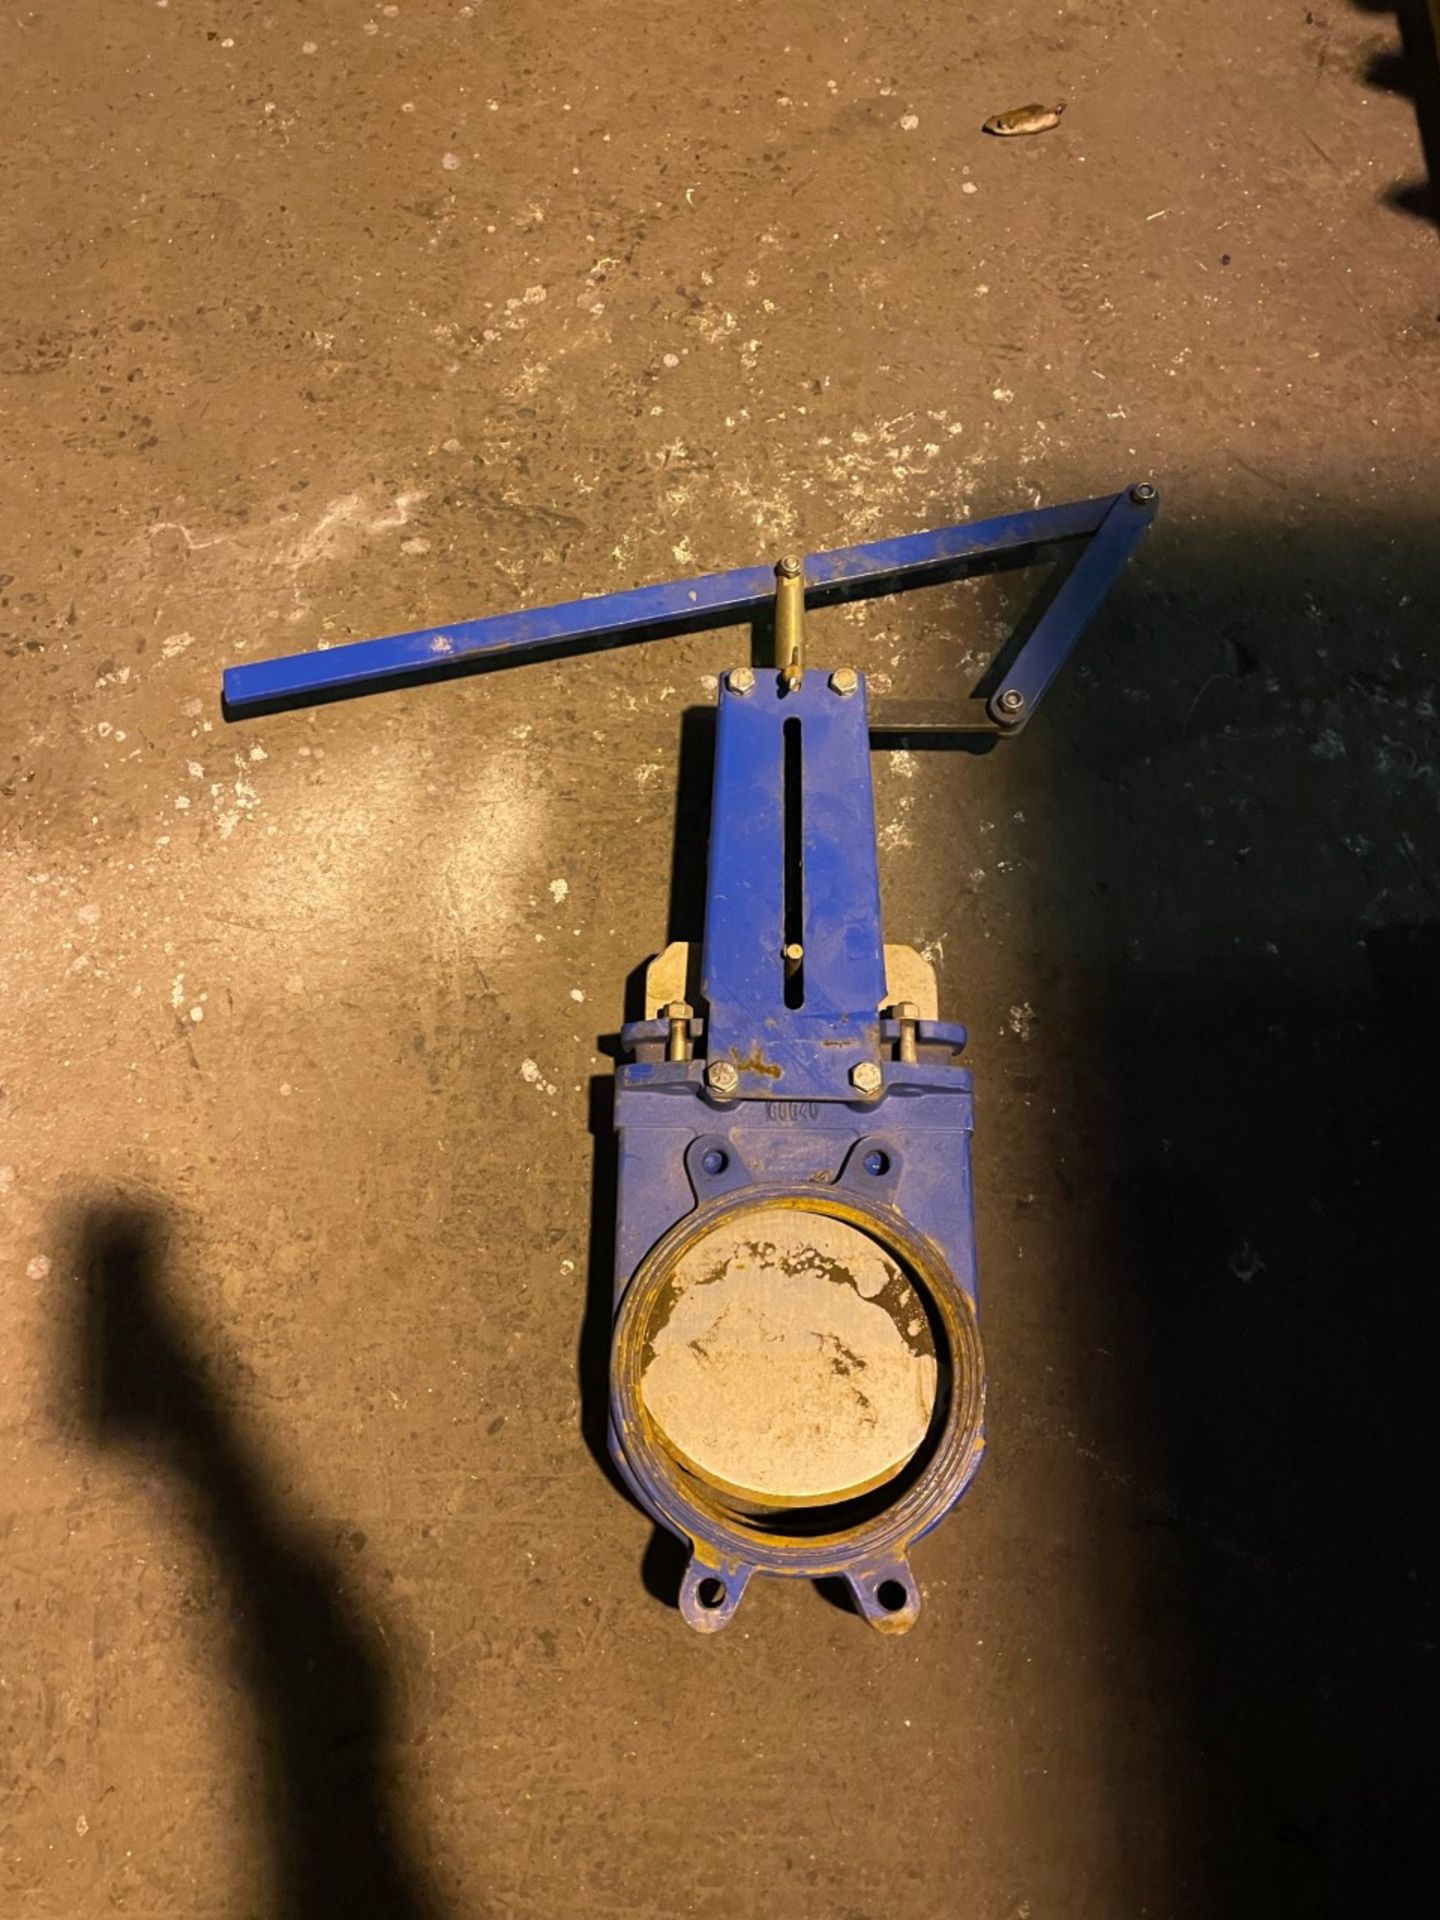 8” cast iron Lever operated knife gate valve. For use on the bottom of hopper or similar. Used but